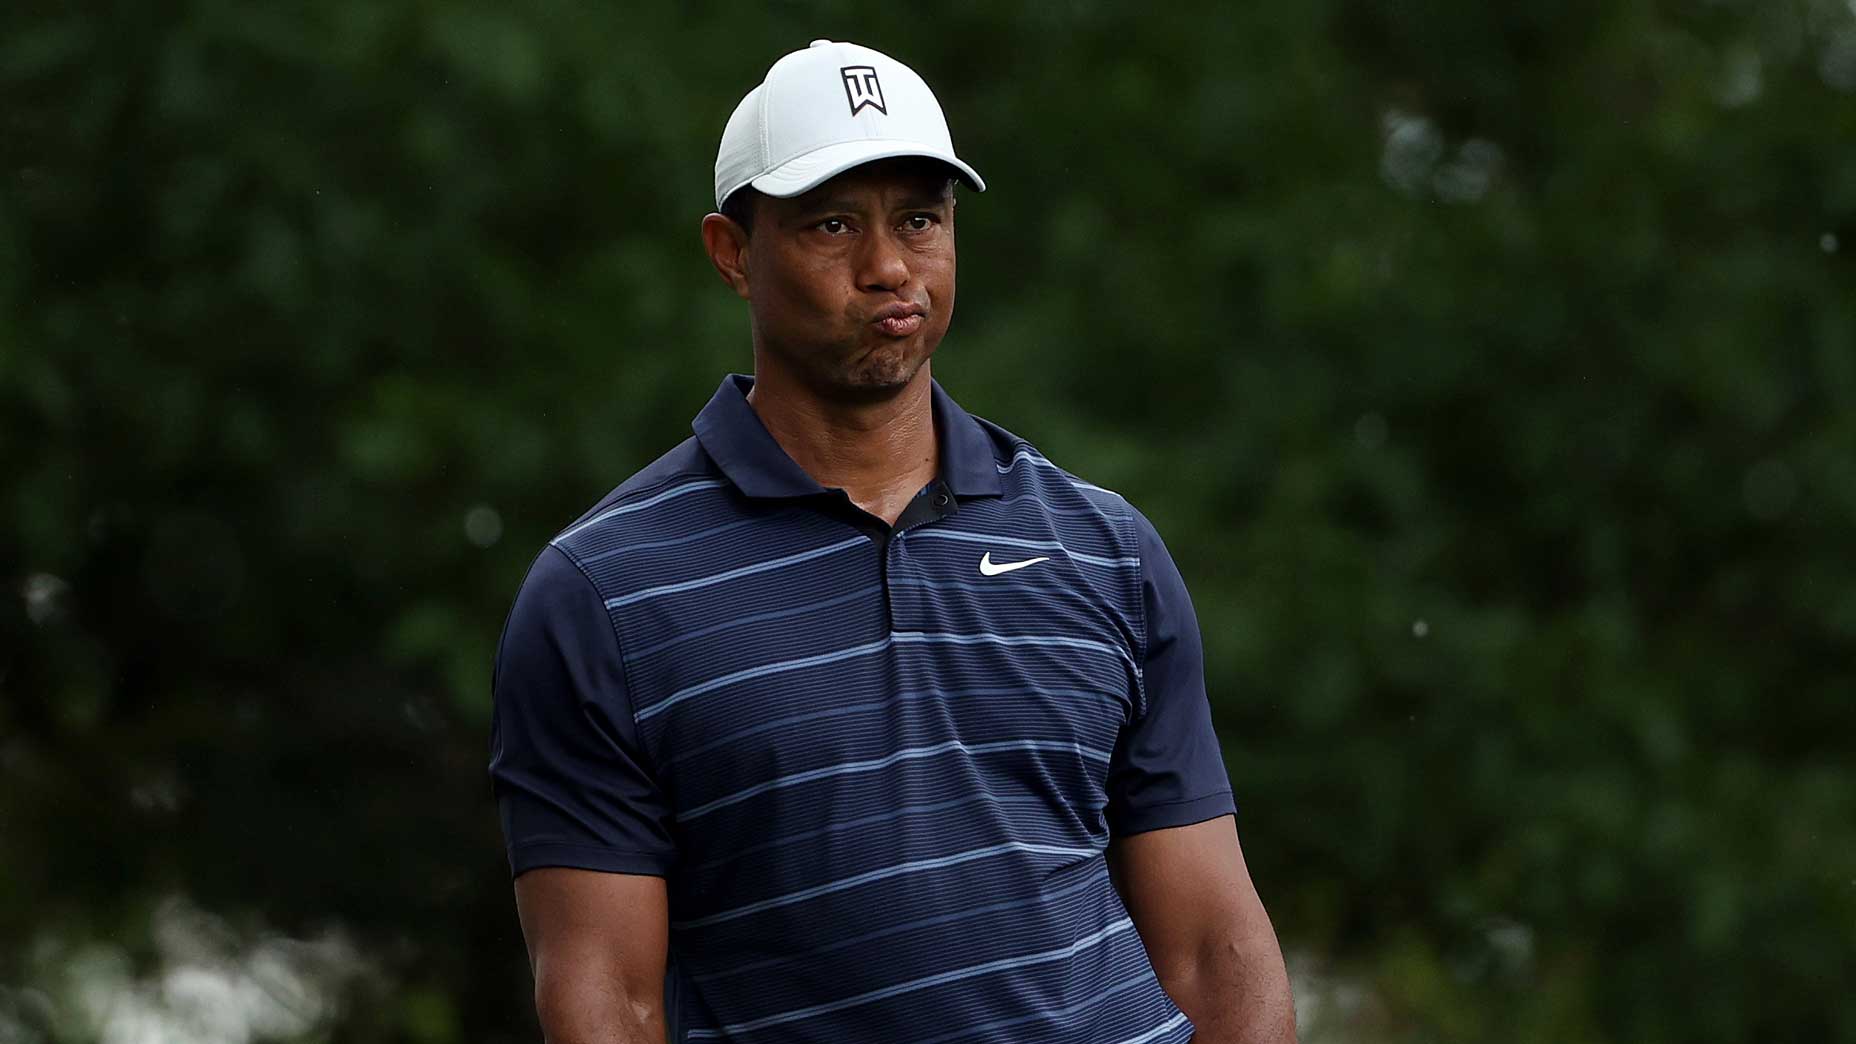 Tiger Woods looks at the camera during the Masters tournament